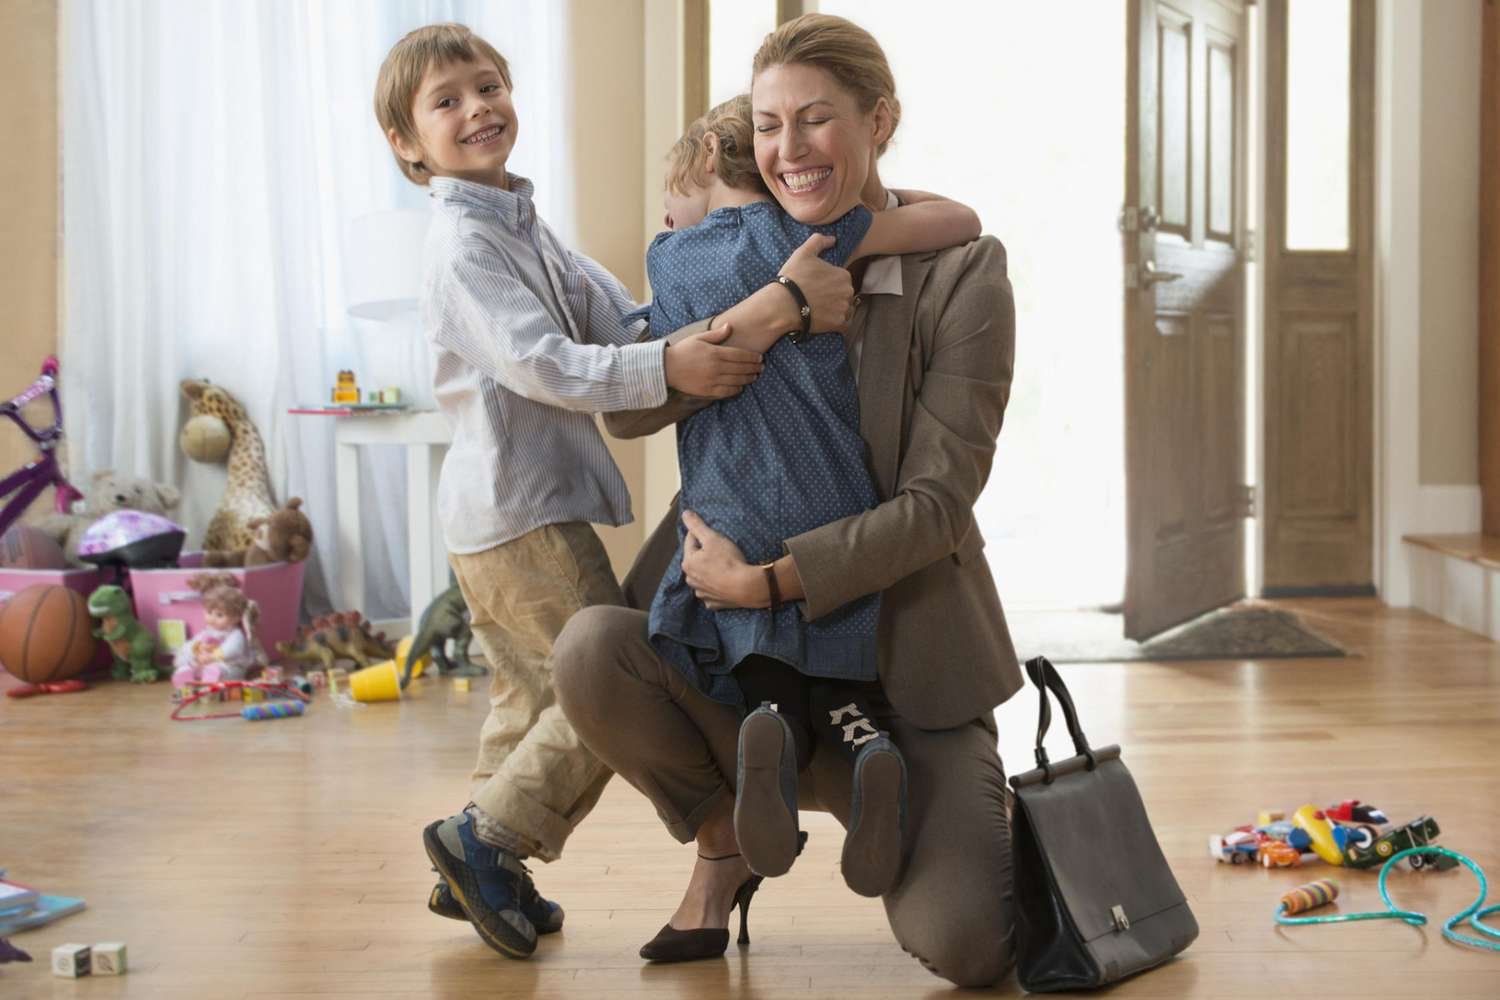 ﻿How to Transition Smoothly From Stay-at-Home to Working Mom